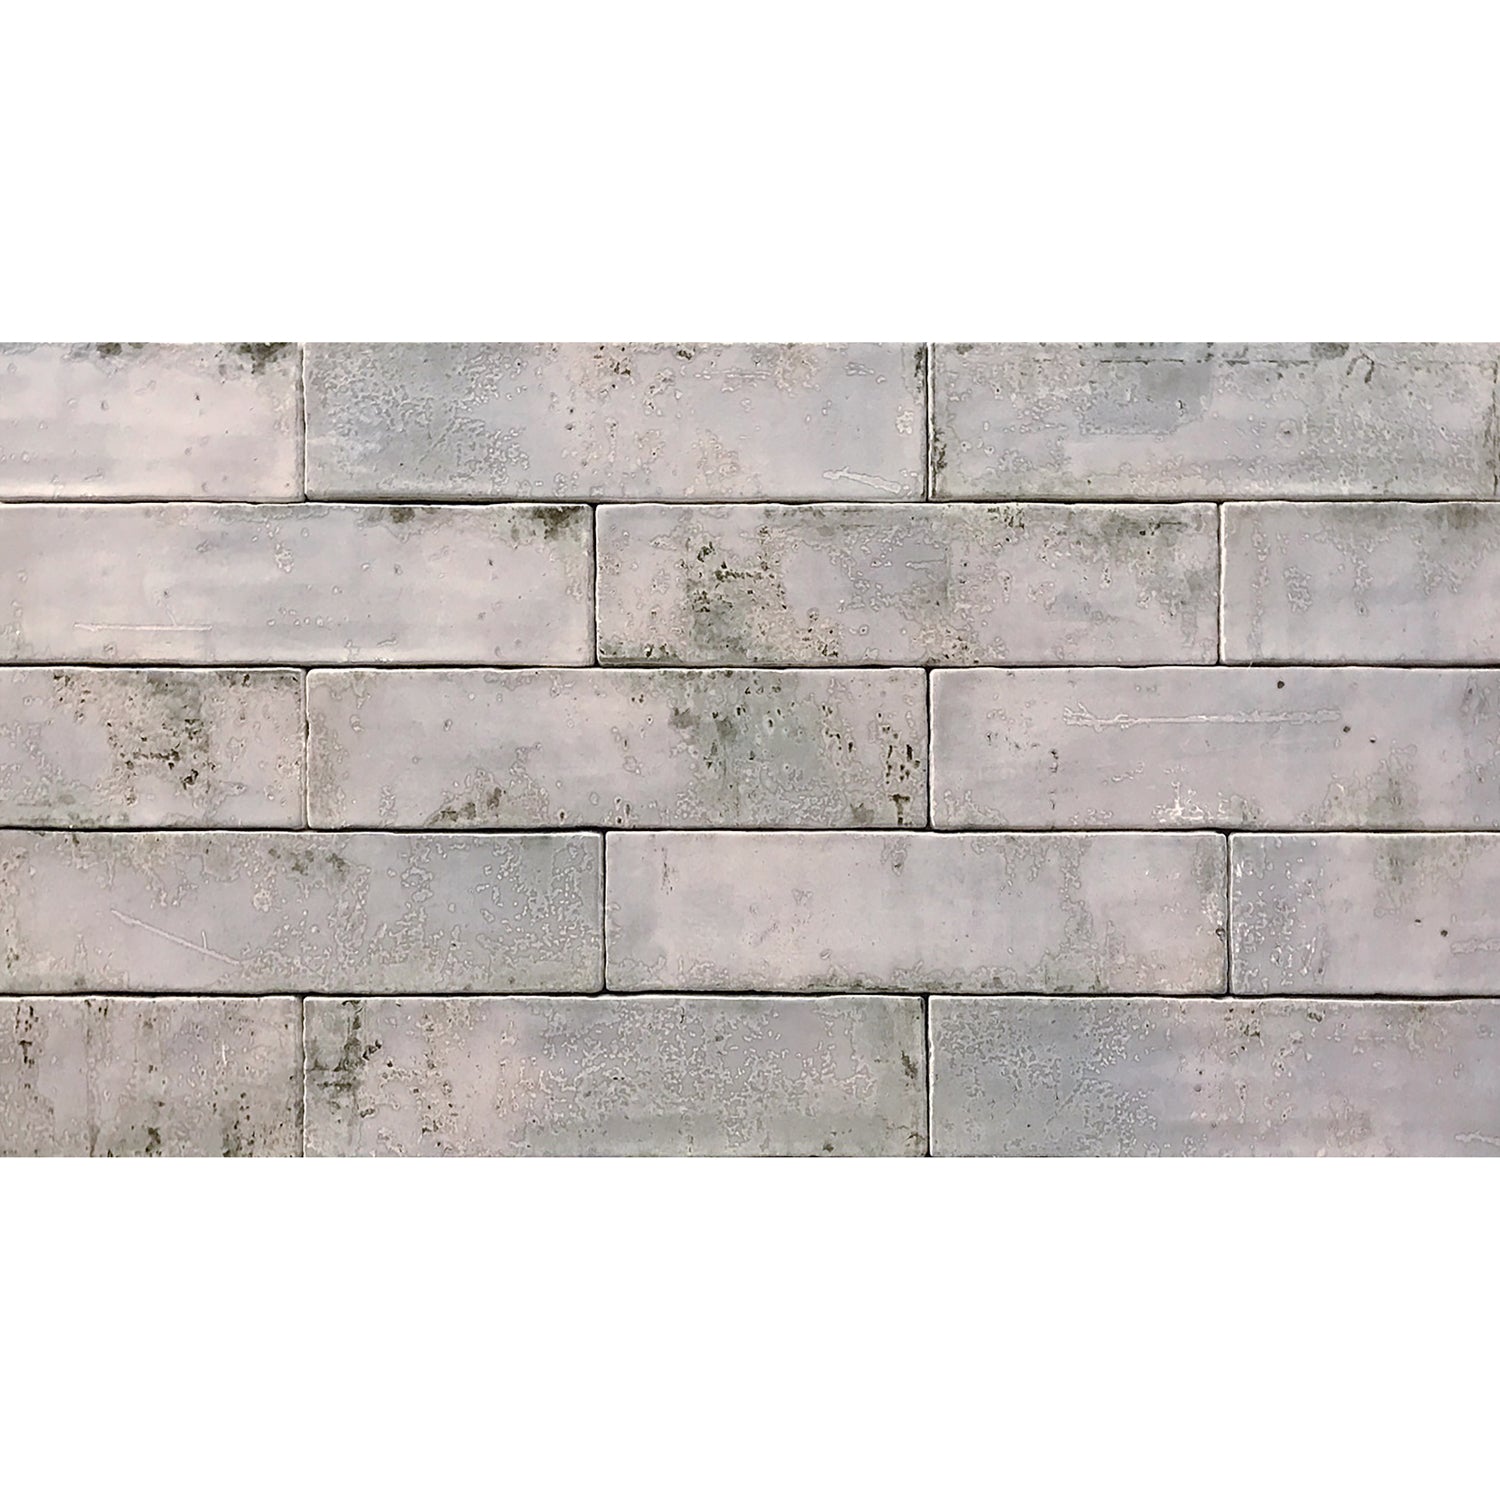 Tesoro Decorative Collection - Grunge Ceramic 3 in. x. 12 in. Wall Tile - Grey